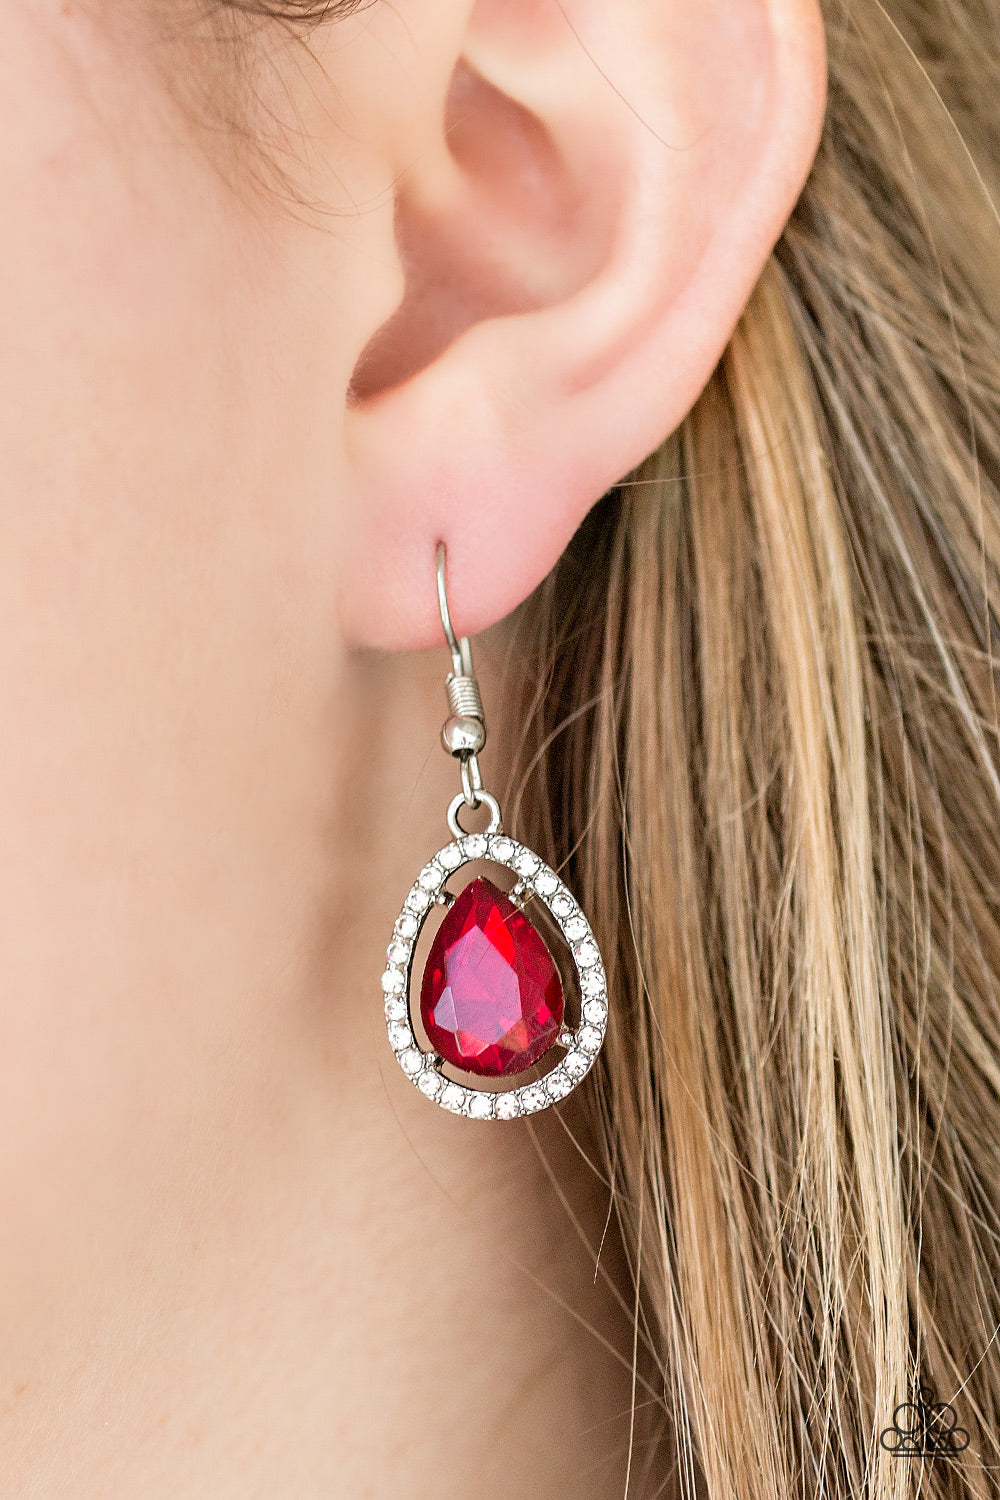 A One-GLAM Show - Red Earrings